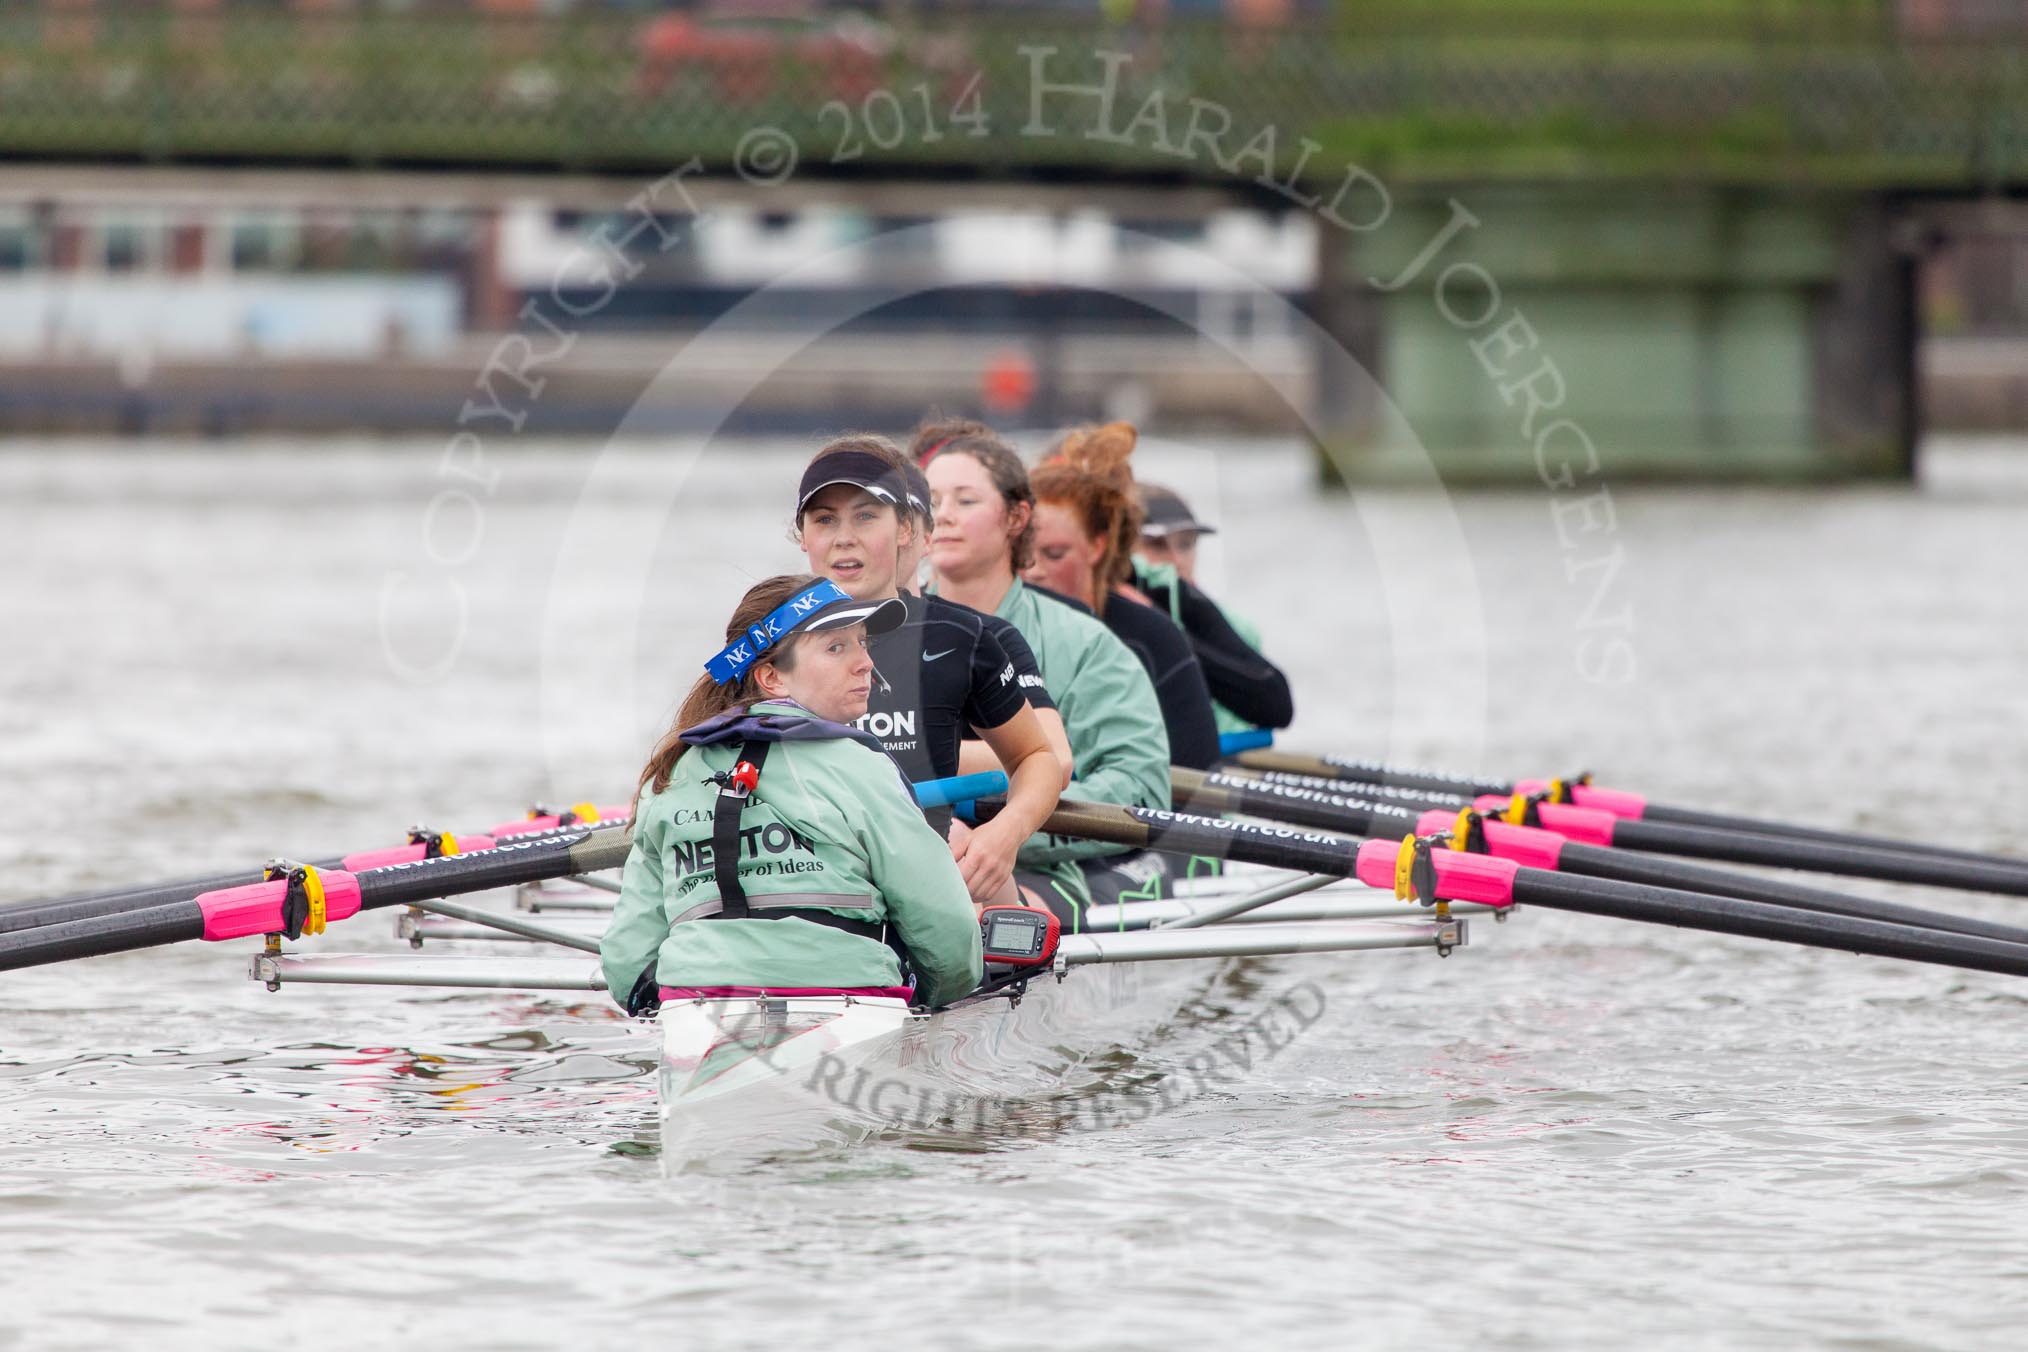 The Boat Race season 2014 - fixture CUWBC vs Thames RC.




on 02 March 2014 at 14:06, image #187